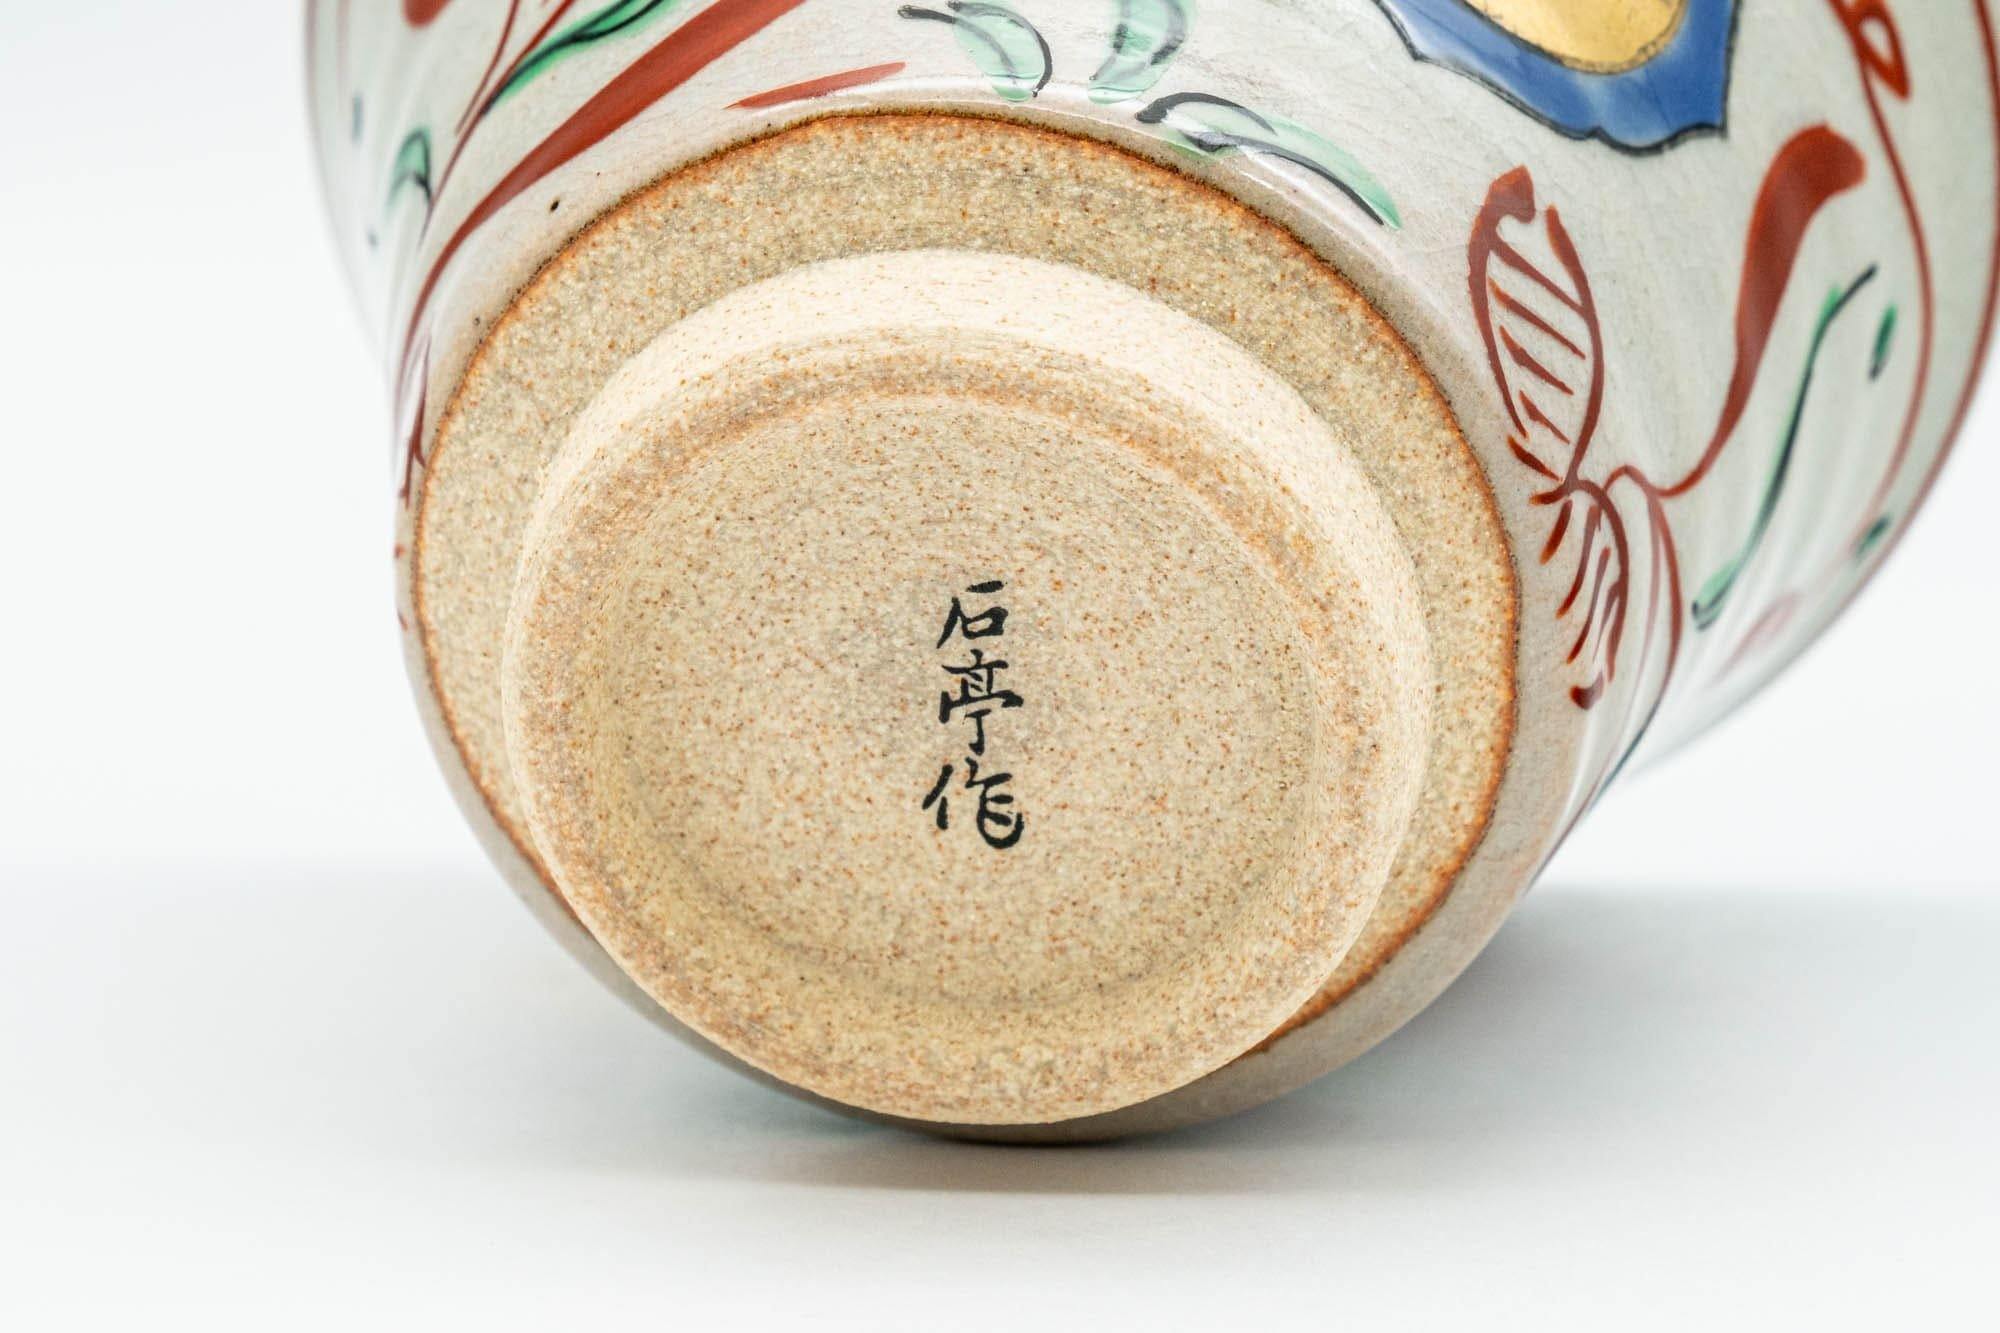 Japanese Teacup - Floral Gold Painted Yunomi - 130ml - Tezumi